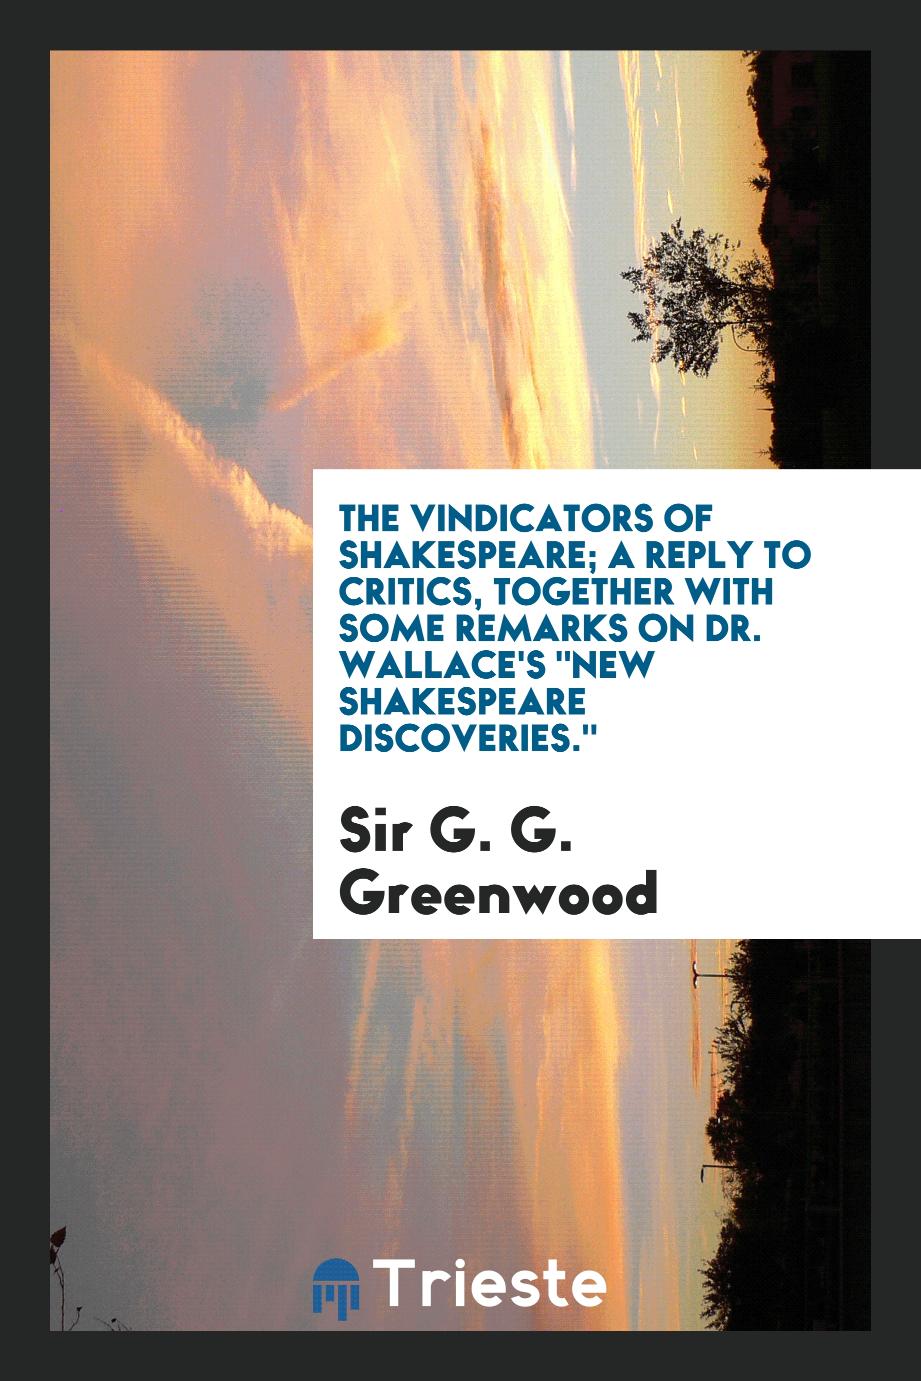 The vindicators of Shakespeare; a reply to critics, together with some remarks on Dr. Wallace's "New Shakespeare discoveries."